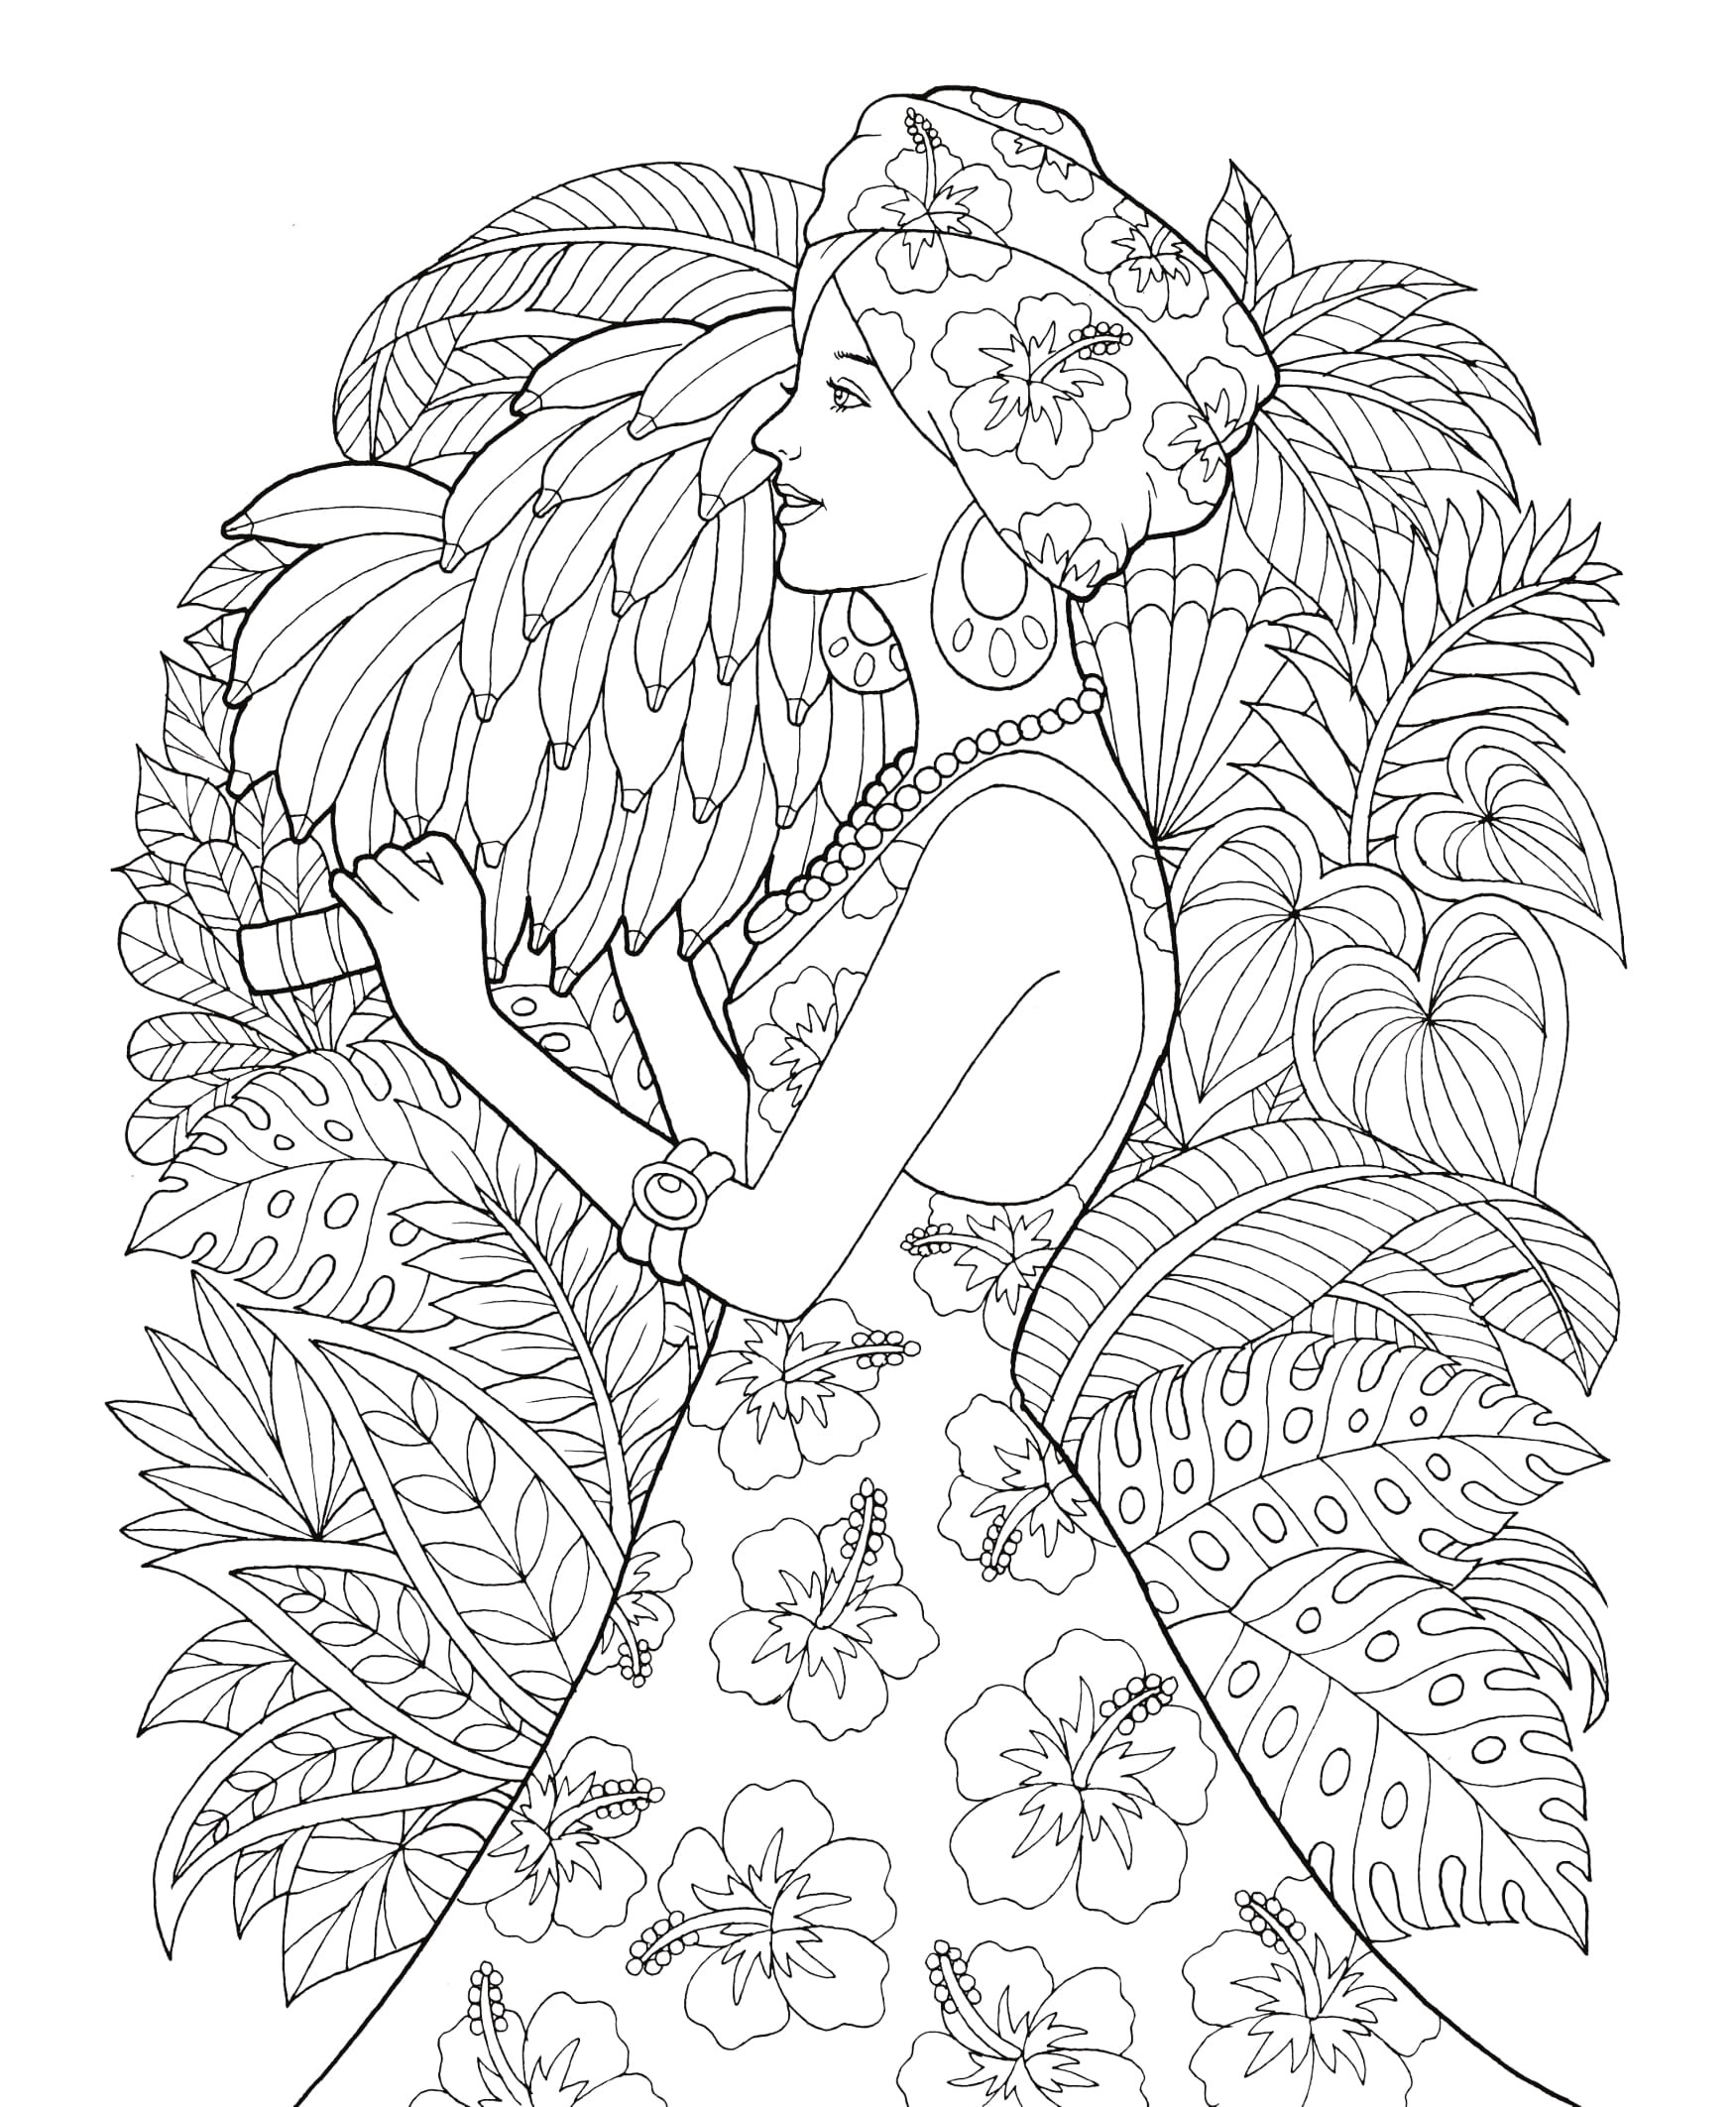 Freebie Friday 06-21-19 Coloring Page